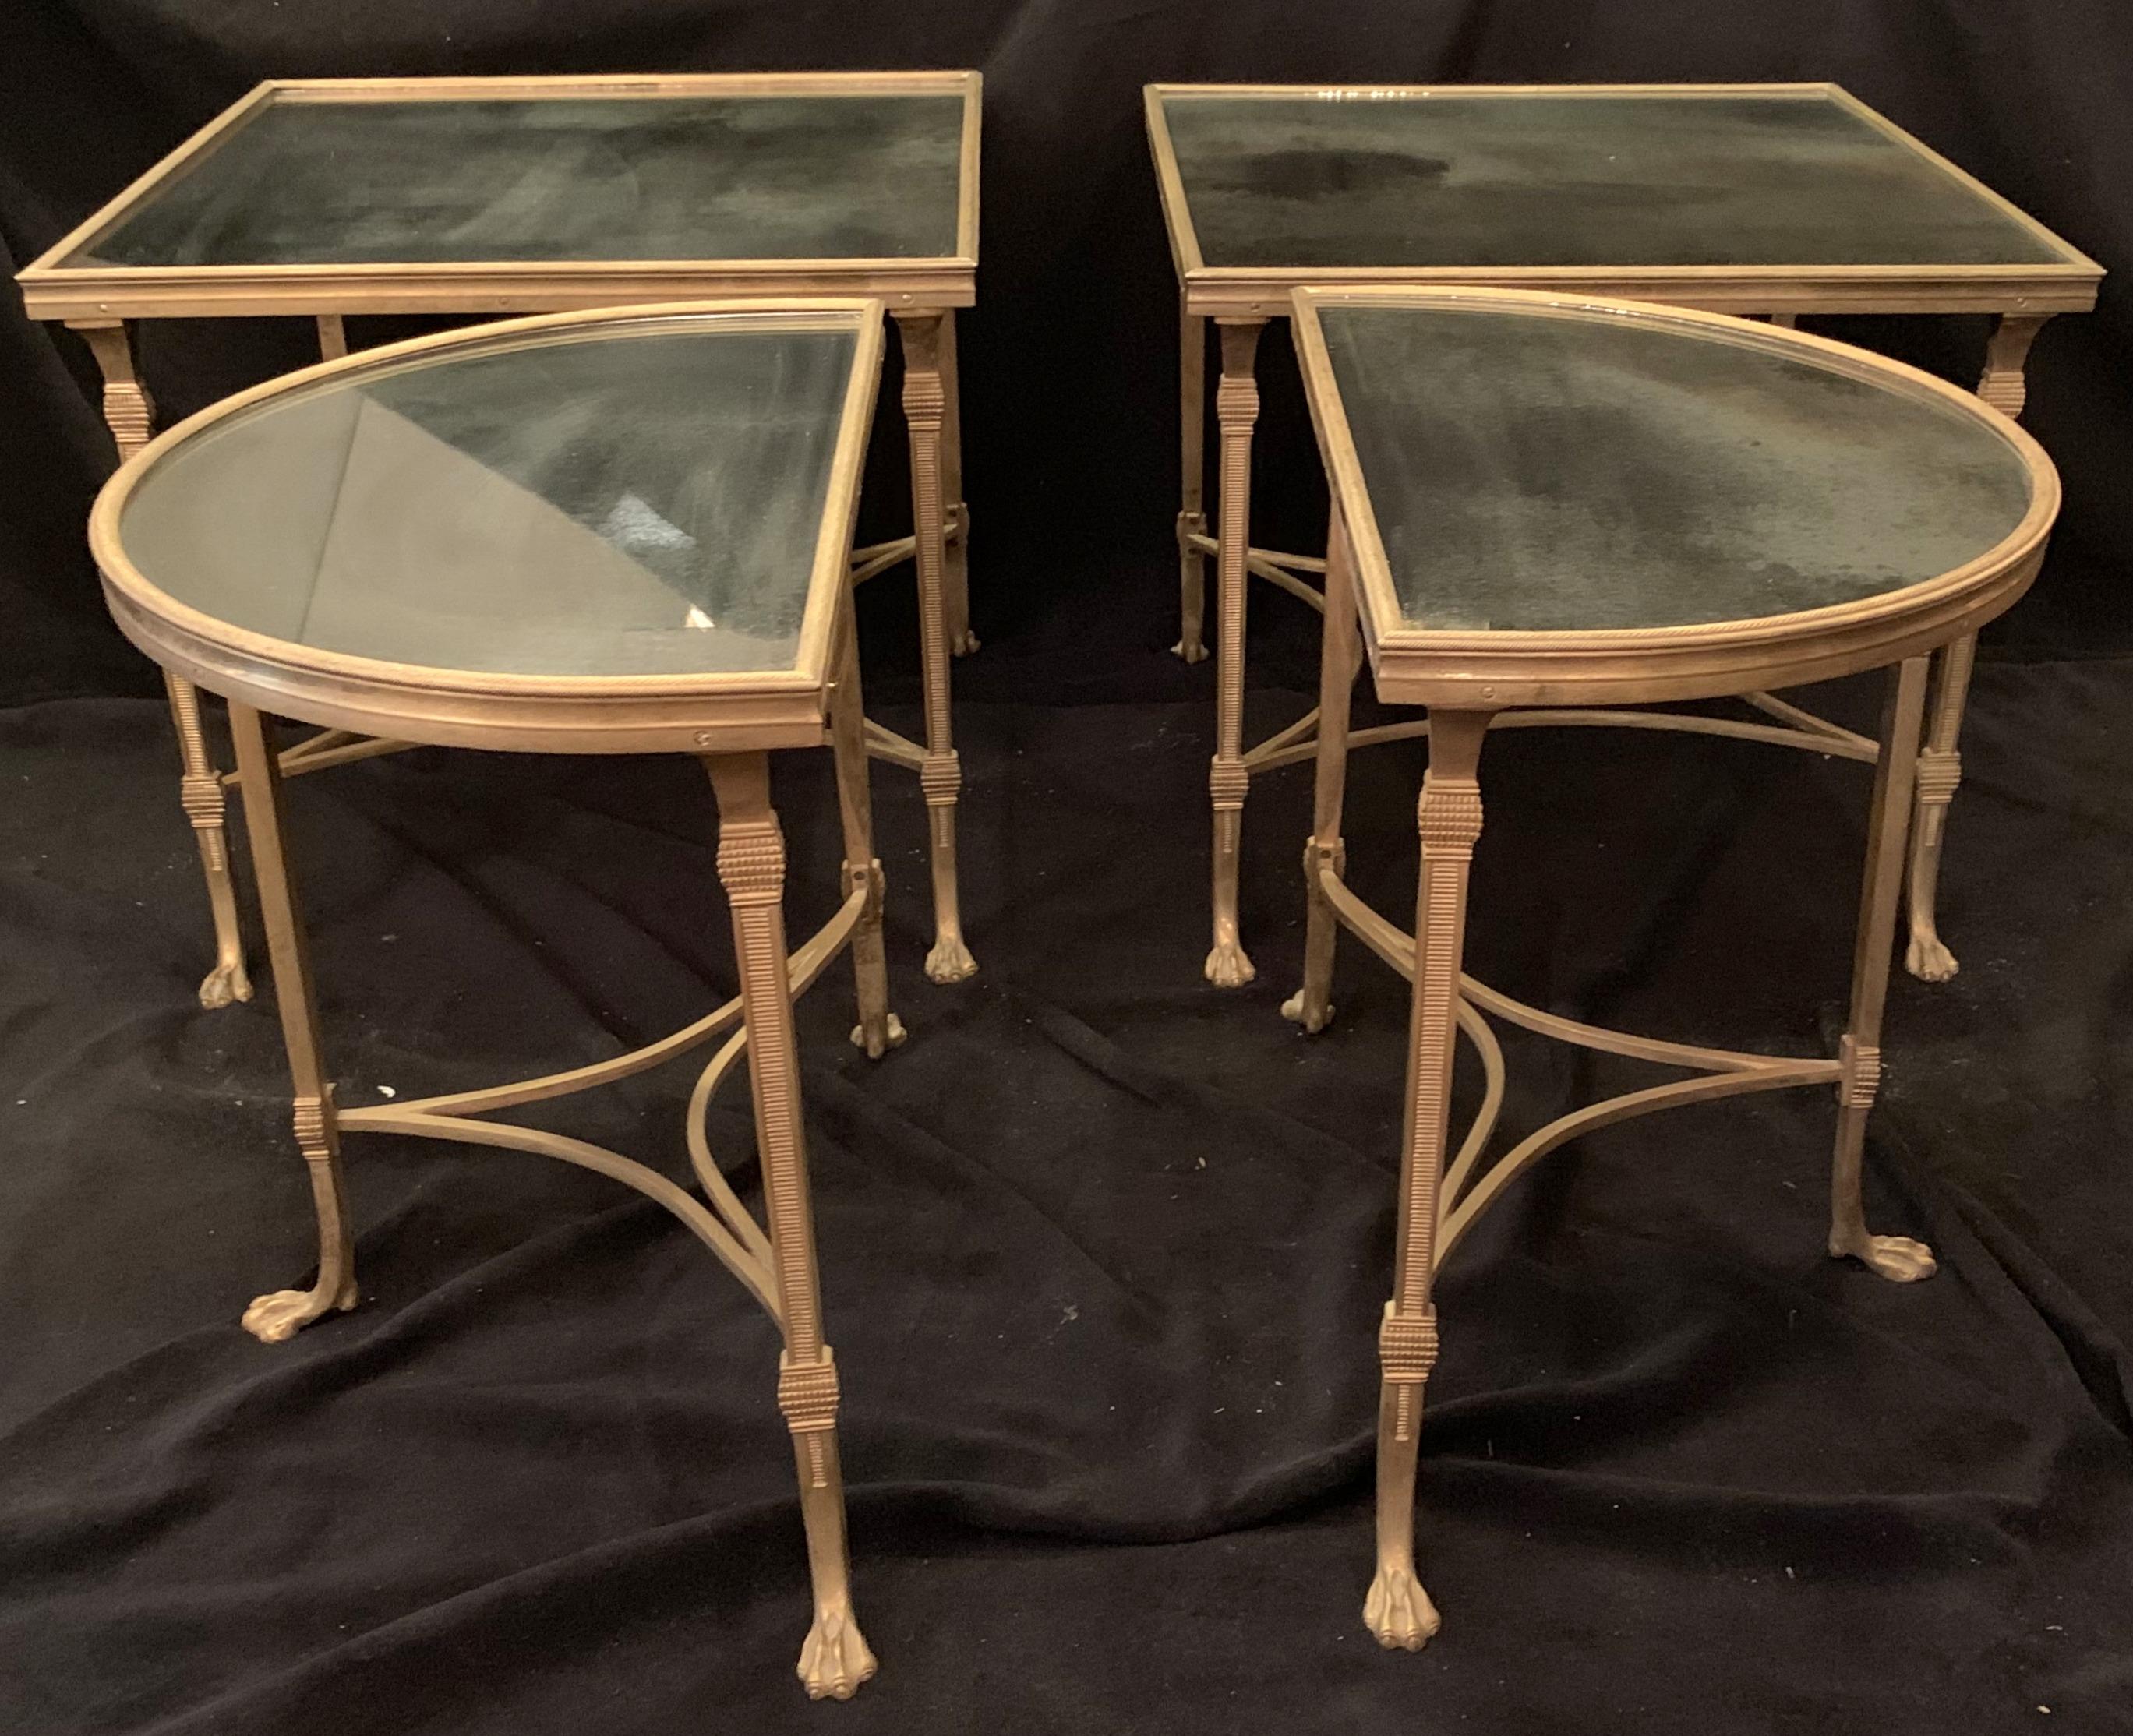 A wonderful French gilt bronze & antique mirrored four-part cocktail or coffee table with paw feet and stretchers across the bottom. Consisting of two square center sections and two rounded ends that are completely finished all the way around so